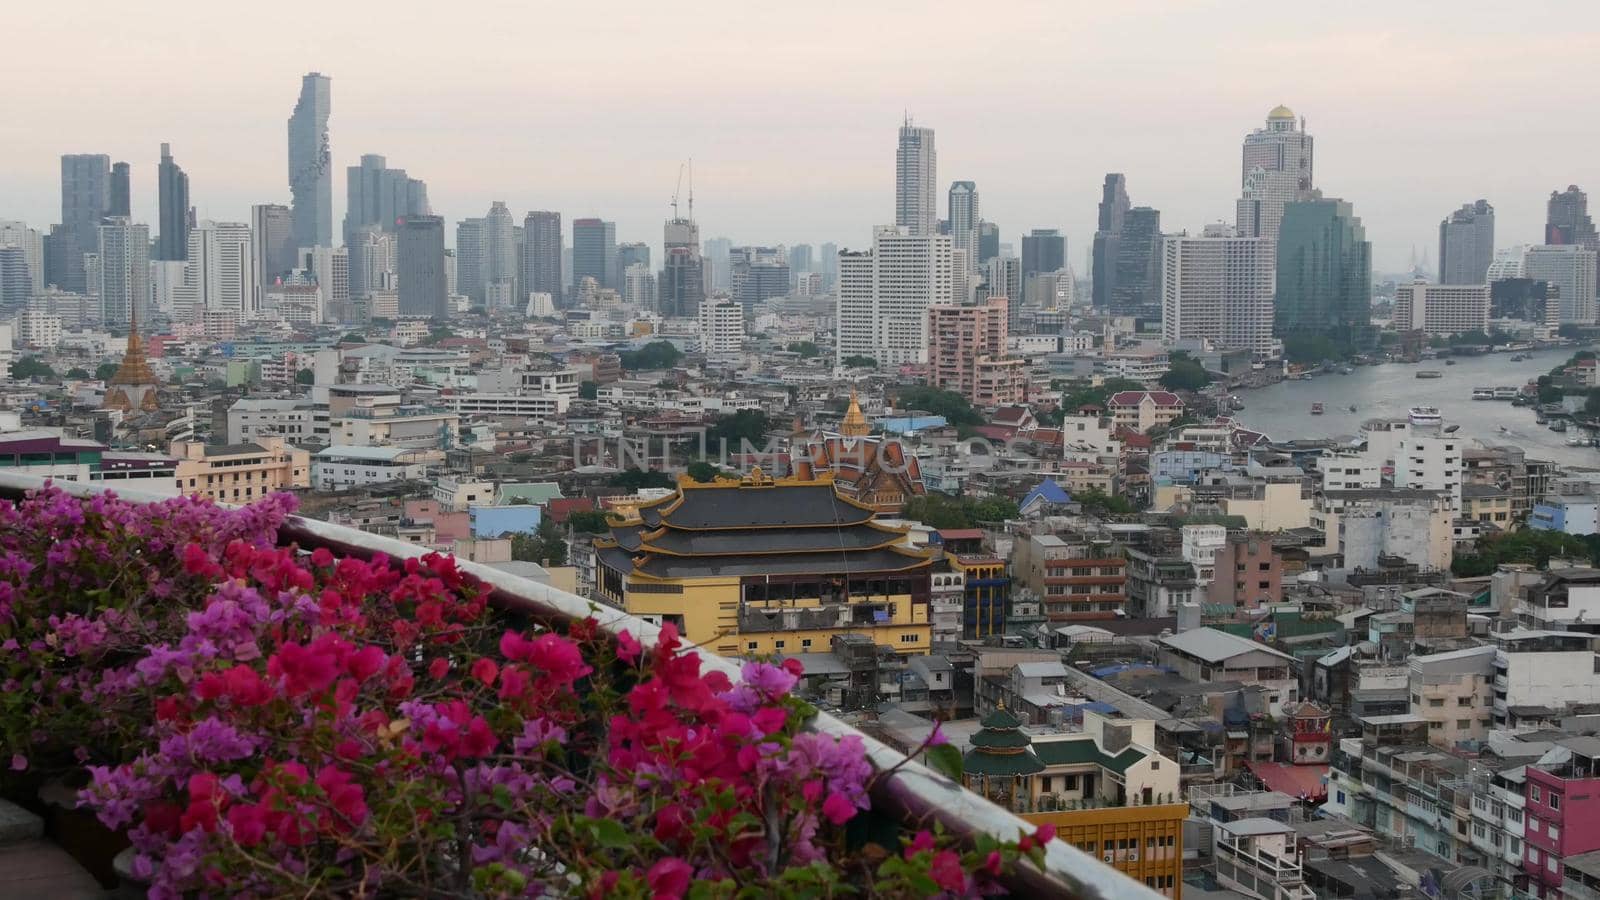 View of traditional and modern buildings of oriental city. Beautiful flowerbed against cityscape of traditional houses and skyscrapers on misty day on streets of Bangkok or Krungtep